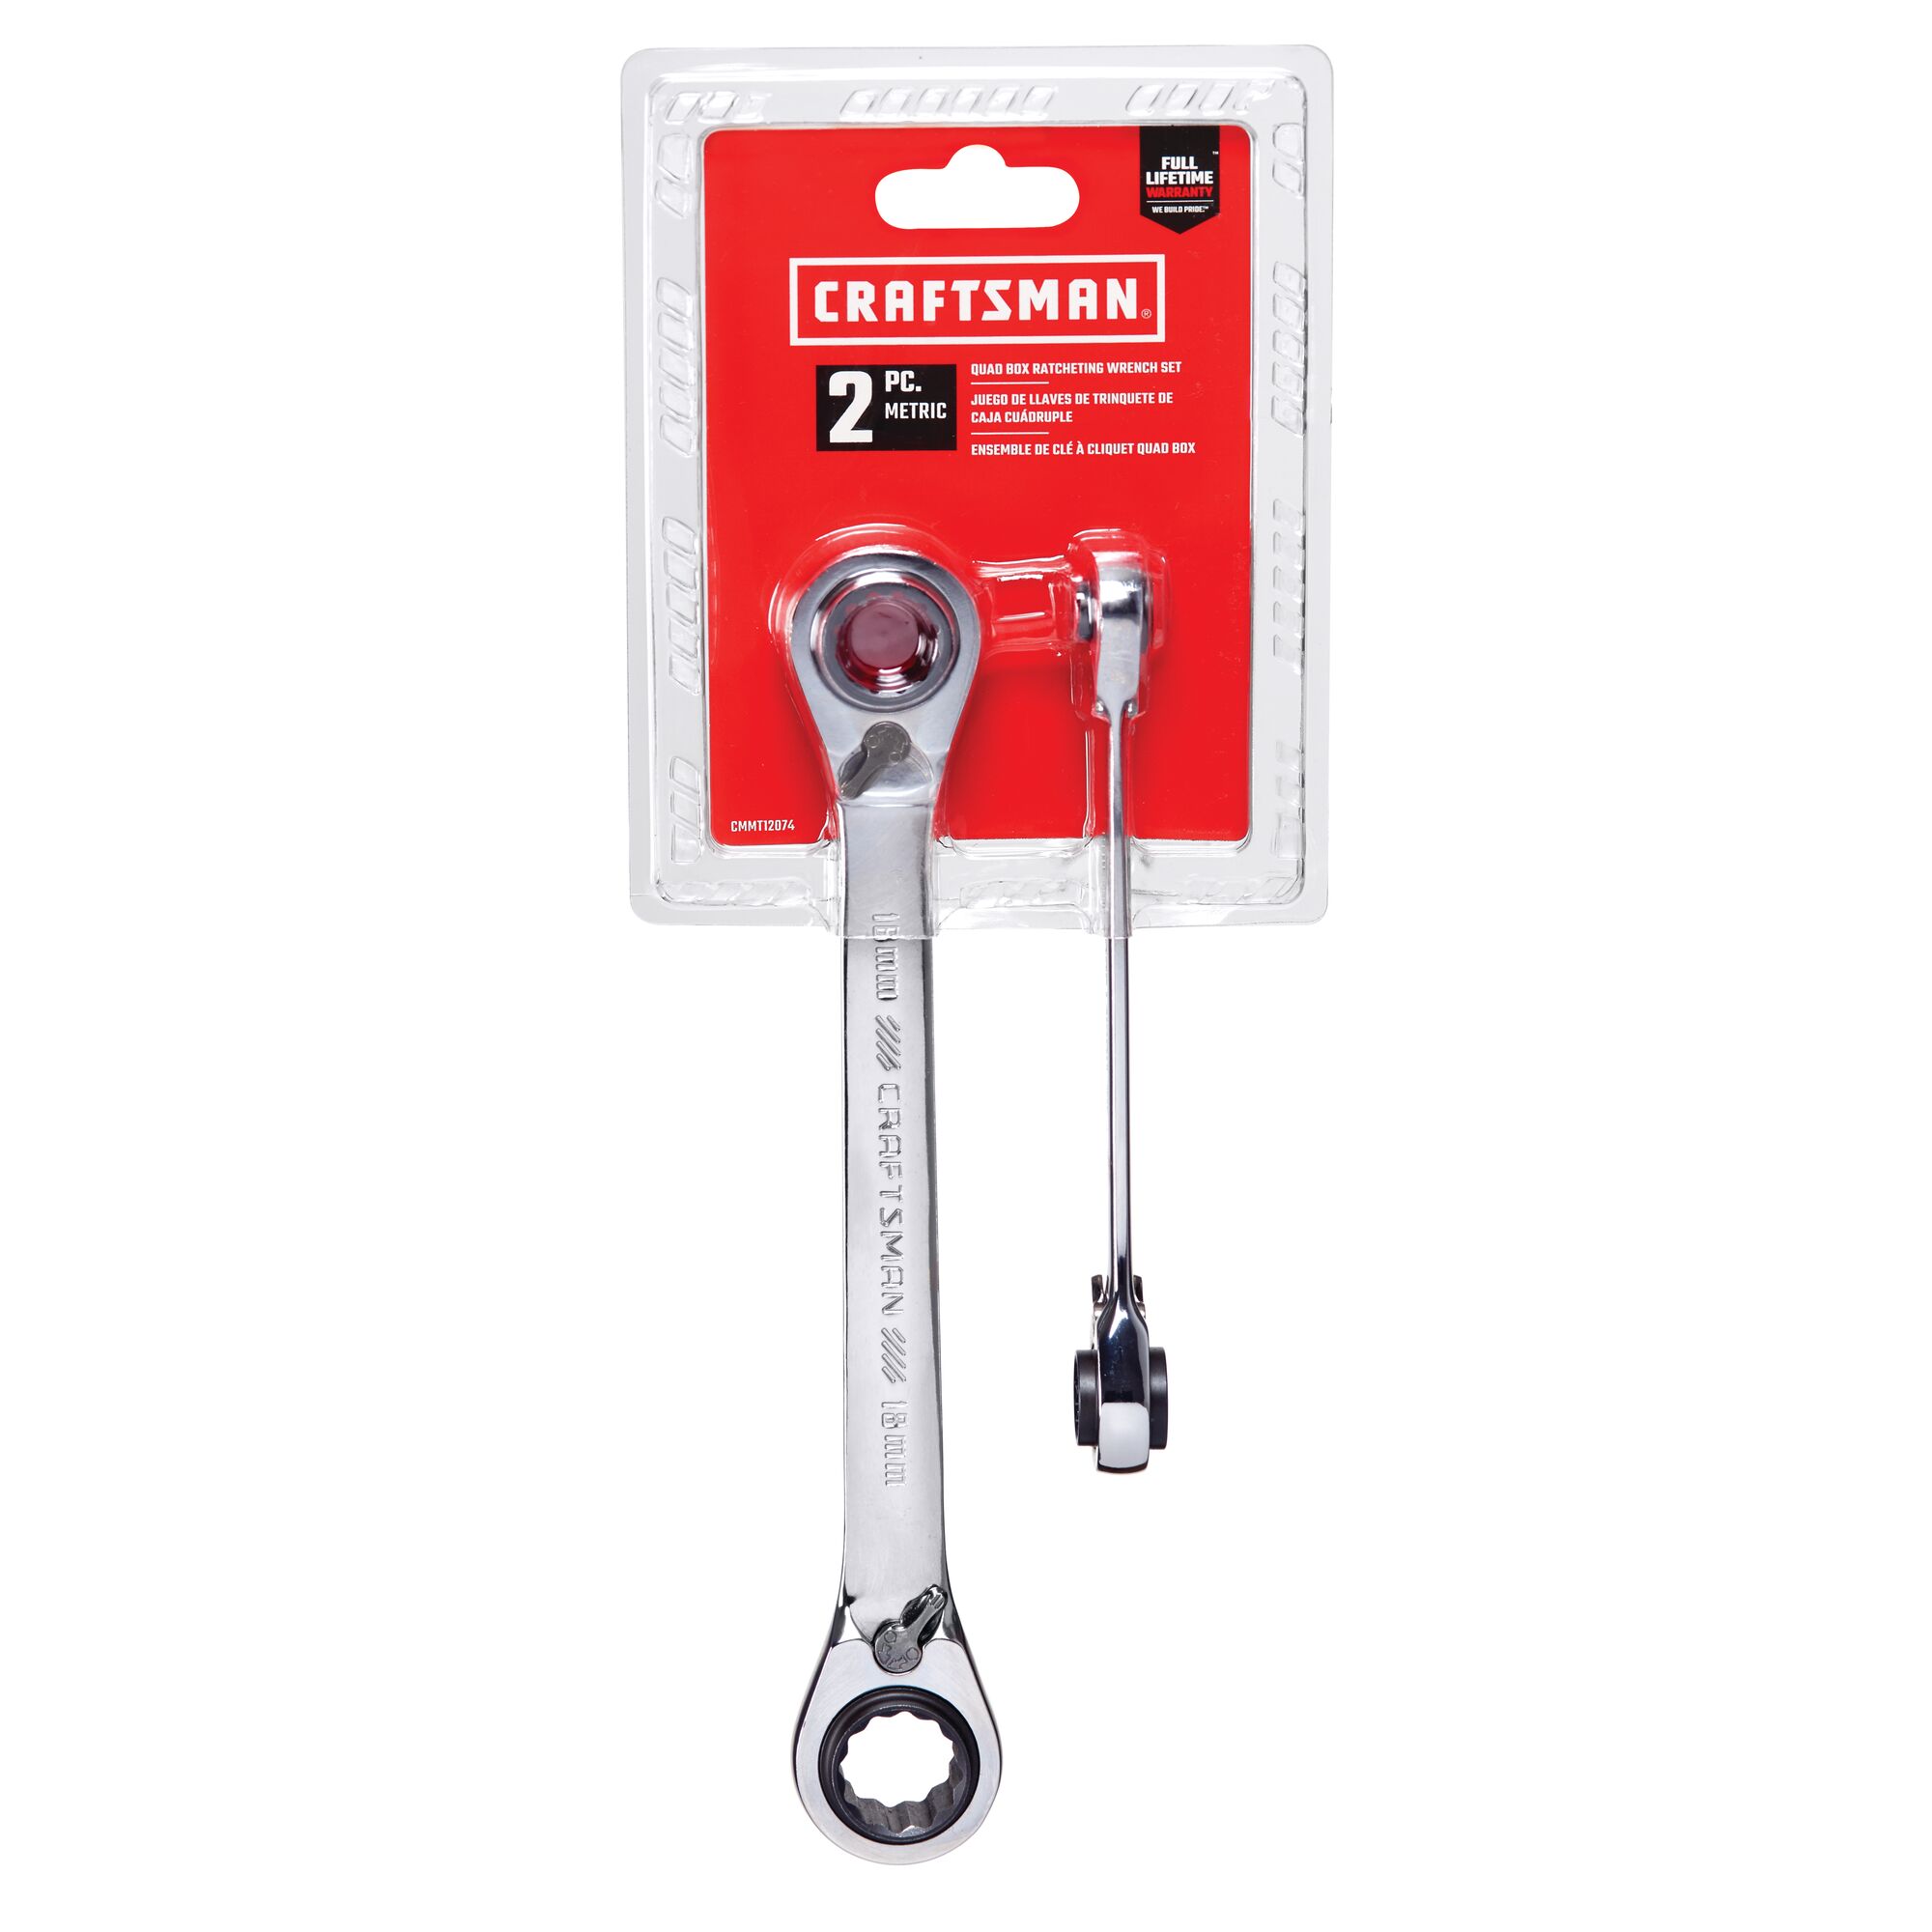 2 piece metric ratcheting box wrench set in plastic packaging.